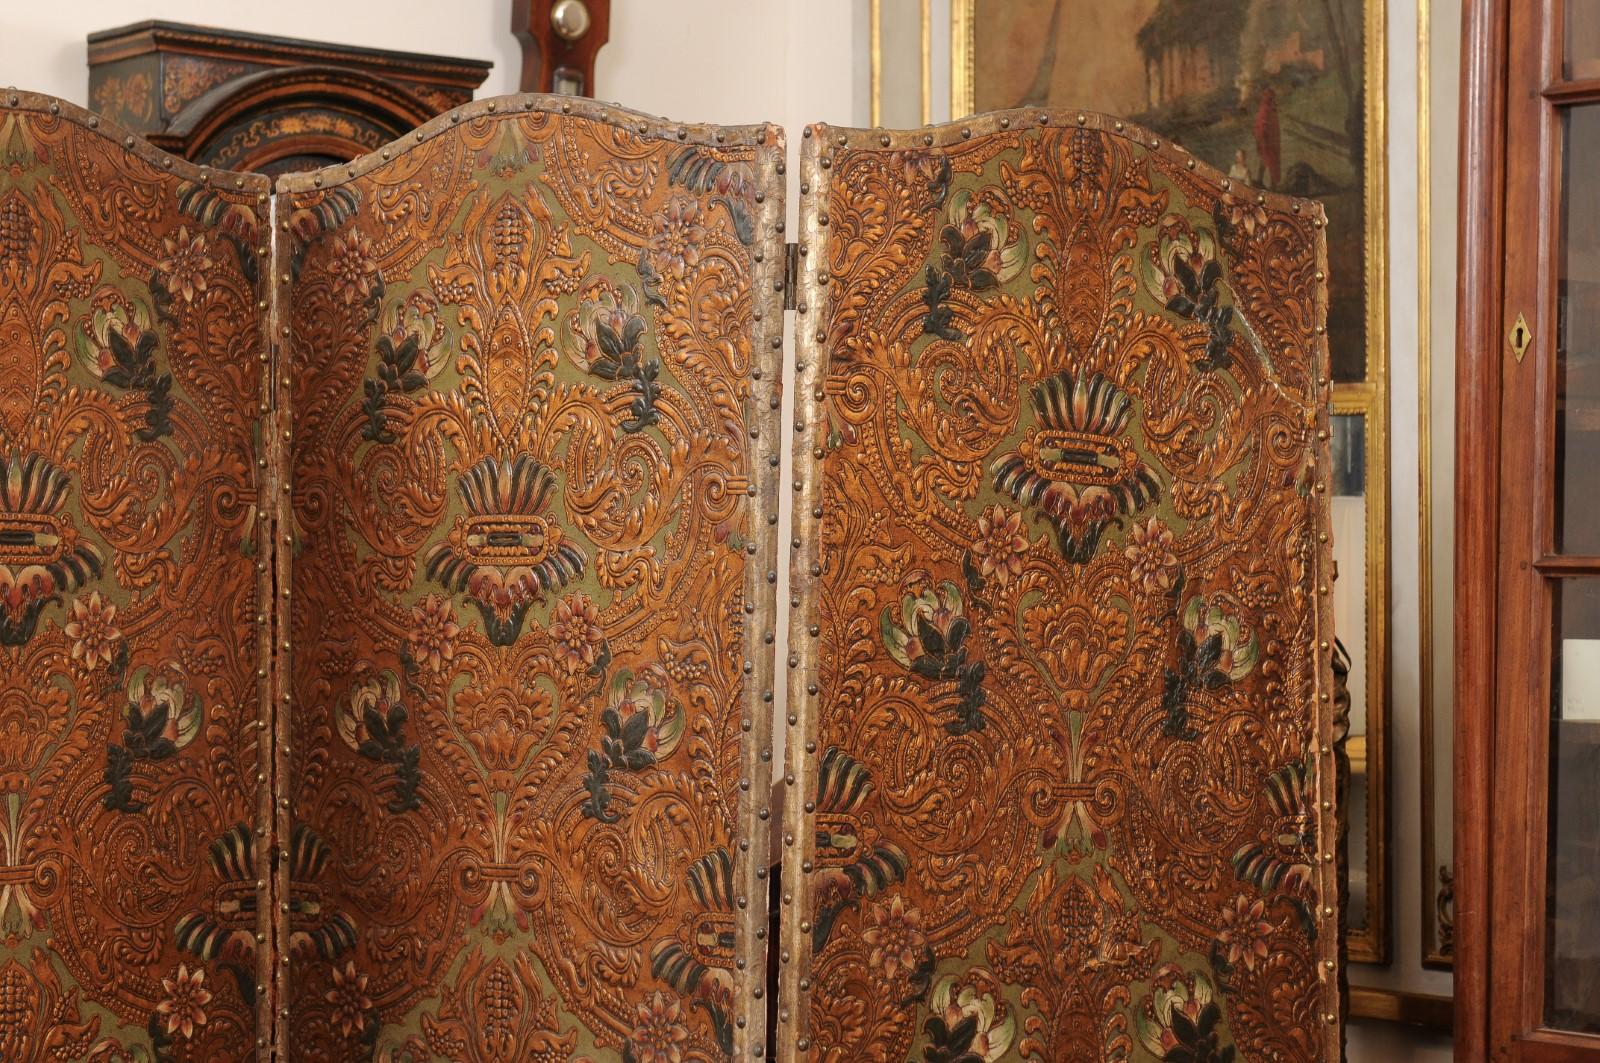  19th Century French 4 Panel Embossed & Painted Folding Screen For Sale 2